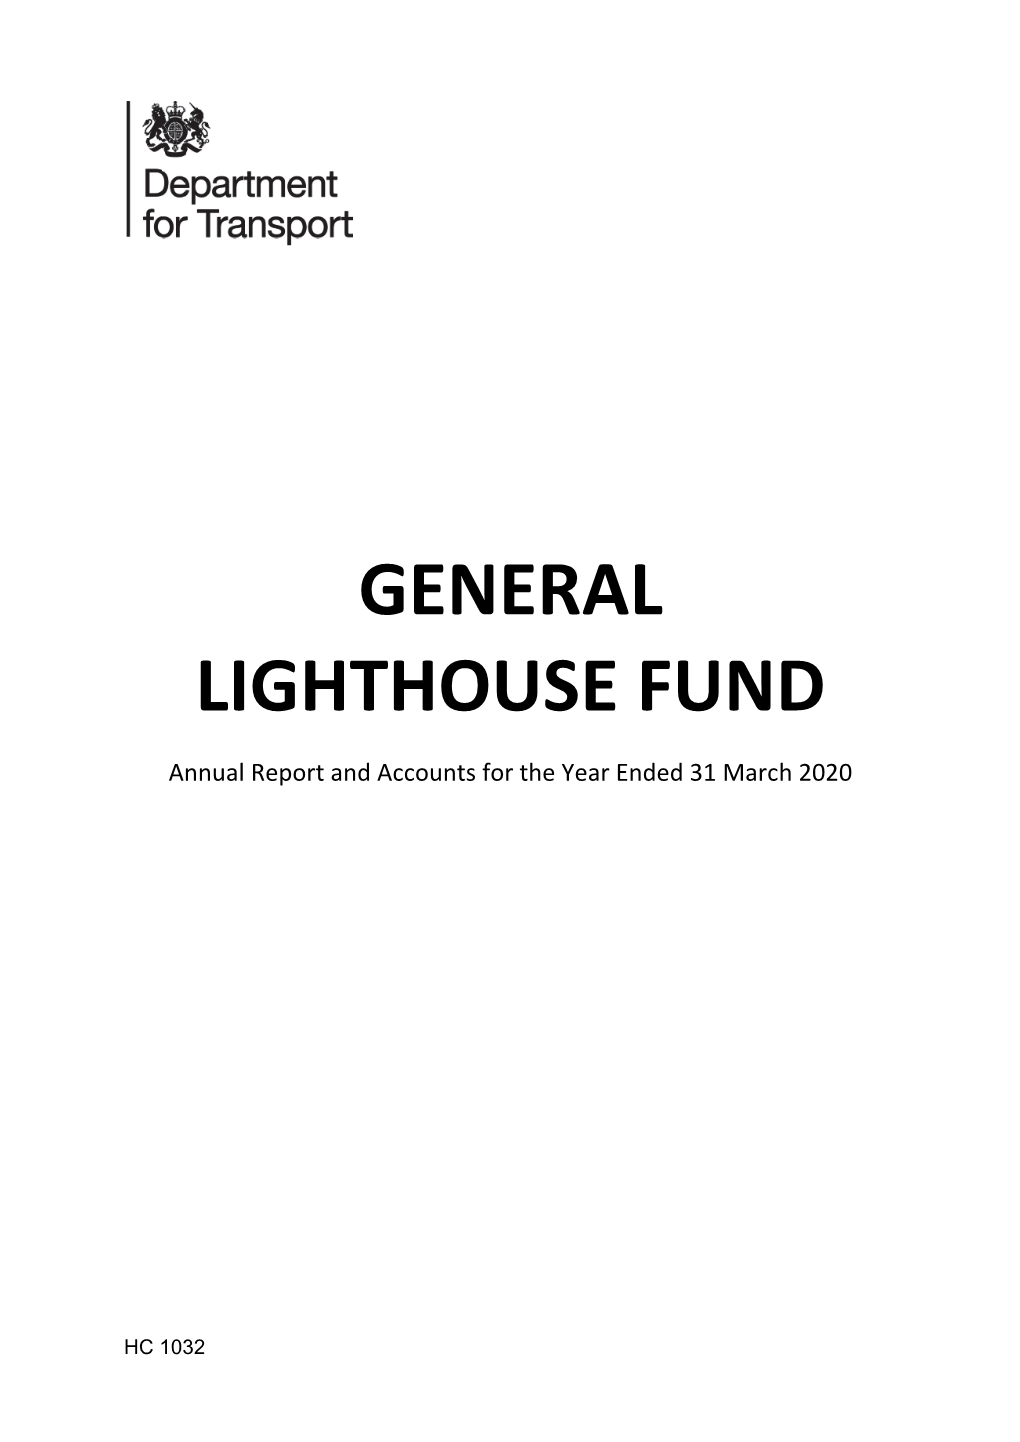 General Lighthouse Fund: Annual Report and Accounts 2020